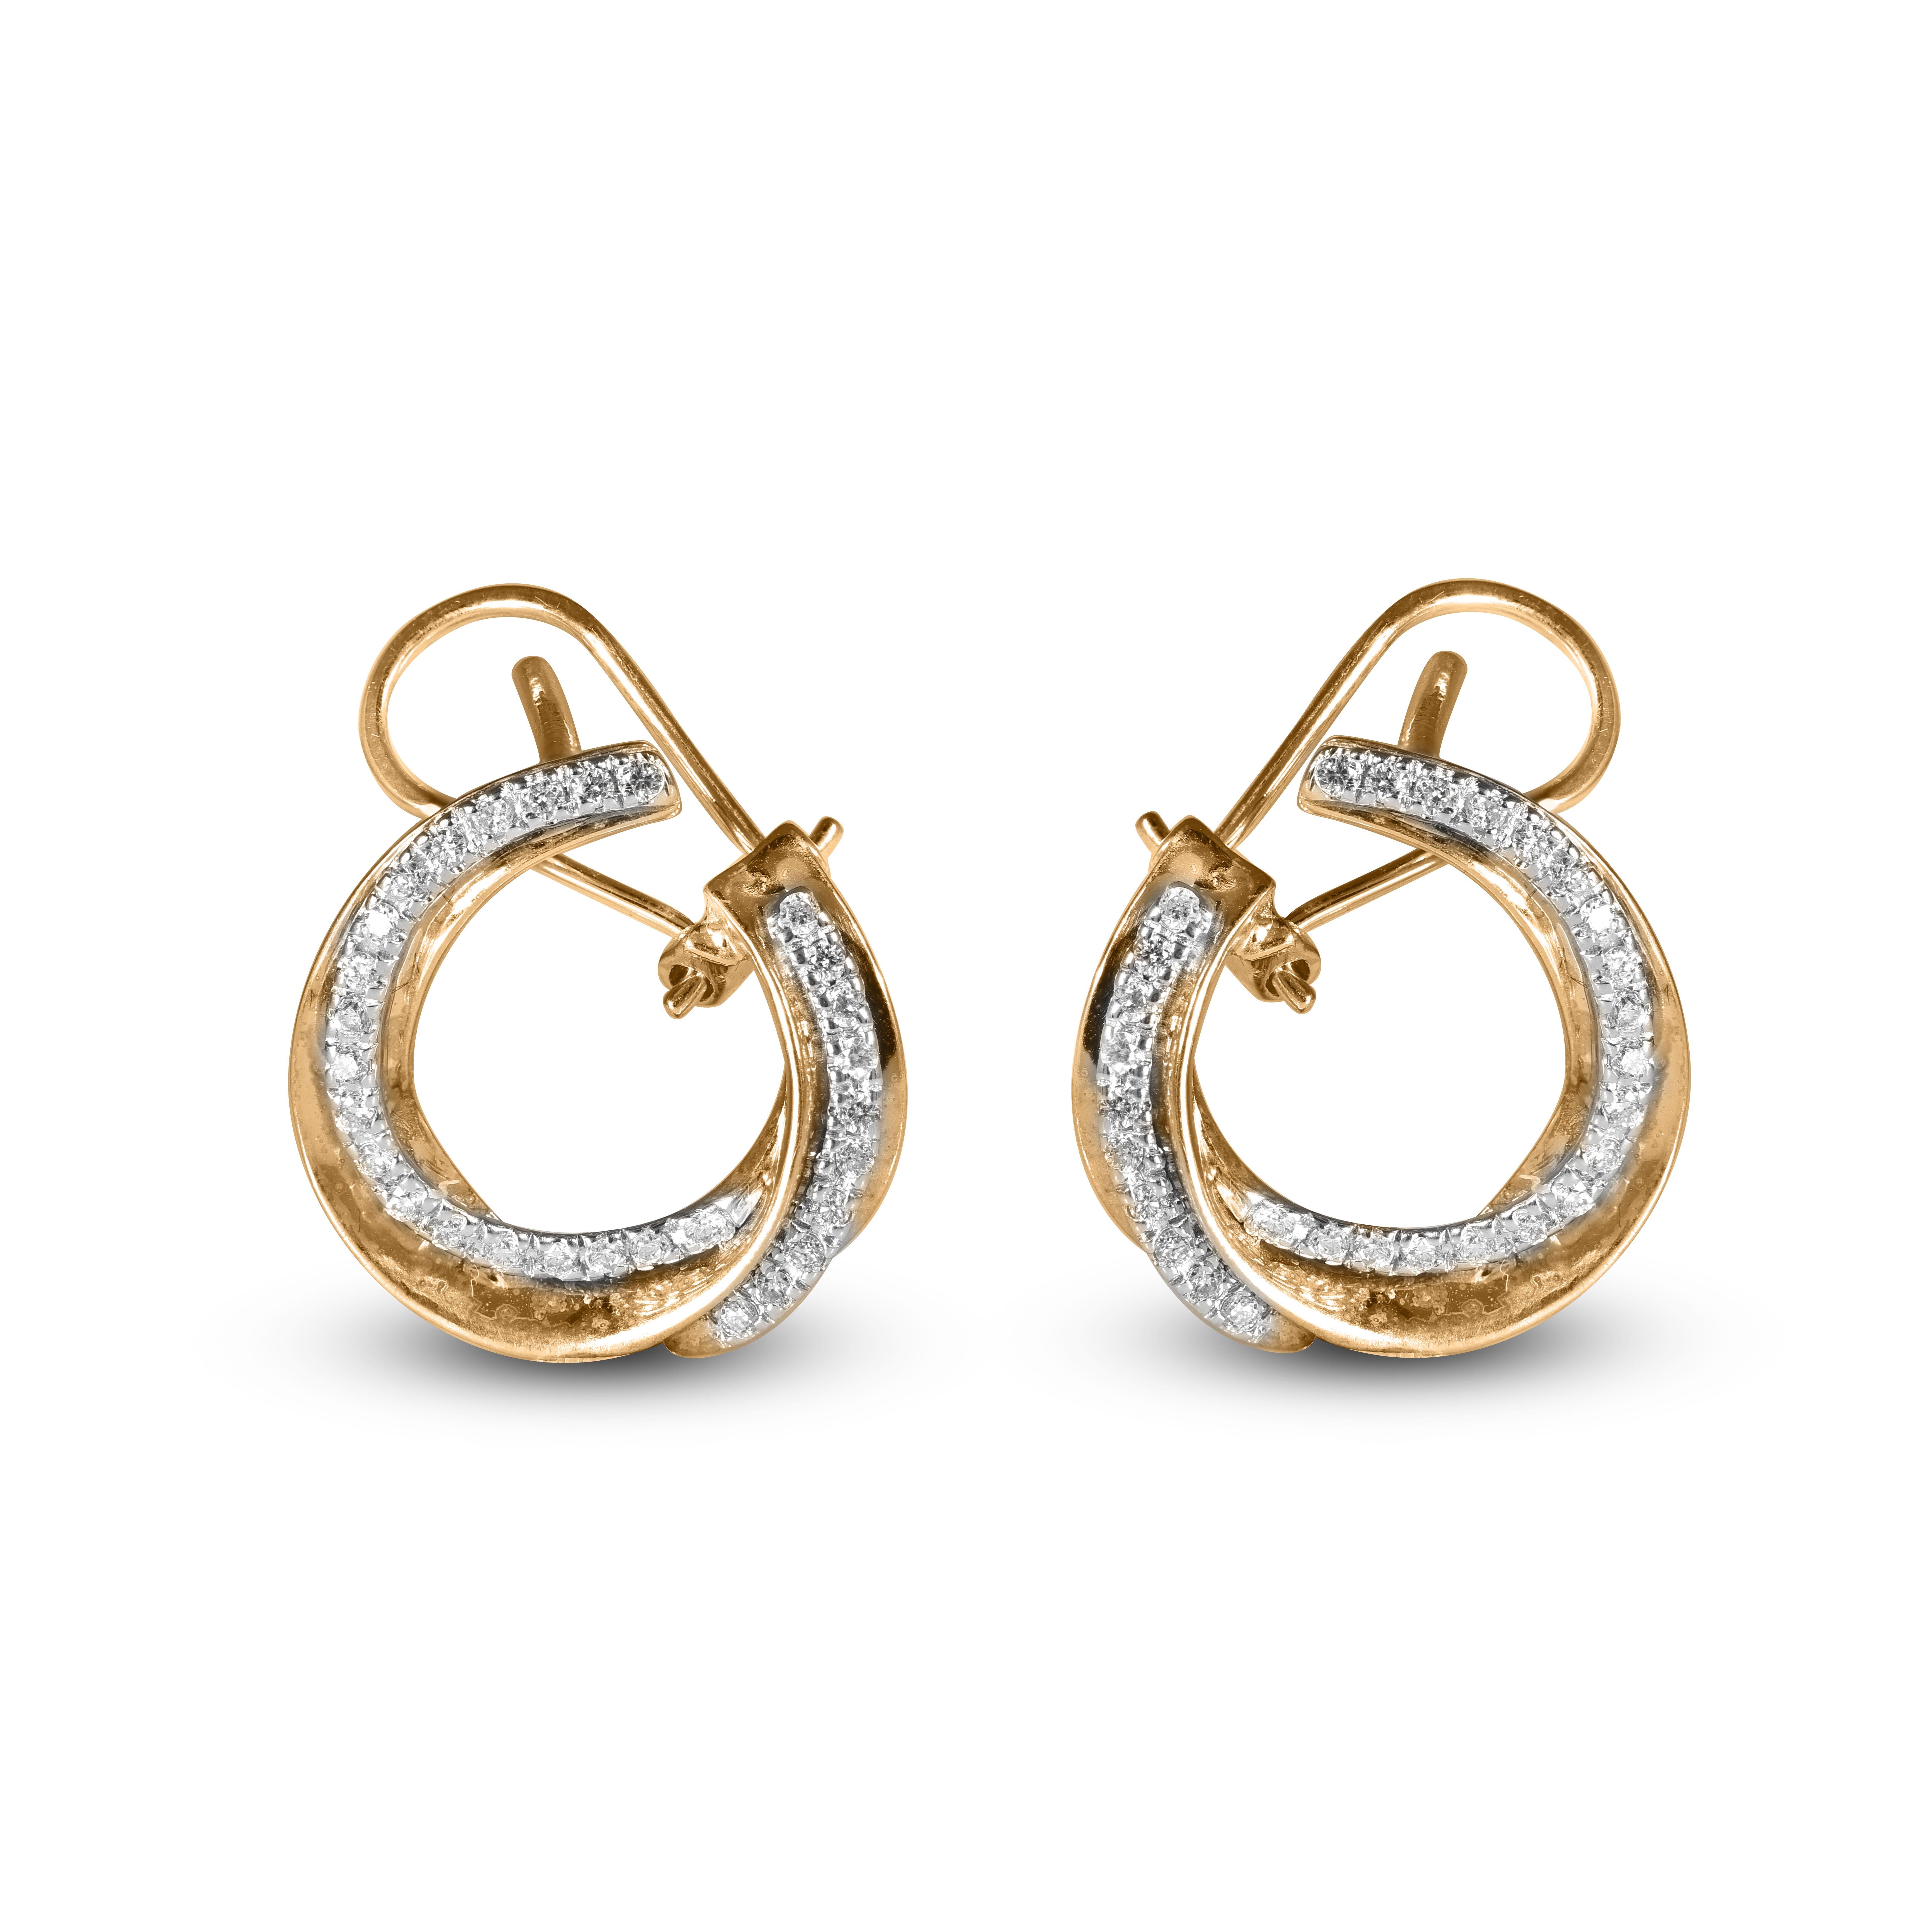 These exquisite design diamond curve hoop earrings offer beauty equaled only to her own. These earrings feature 58 round-cut diamond set in prong setting and fashioned in 18 Karat Yellow Gold. These timeless hoop earrings  secure comfortably with